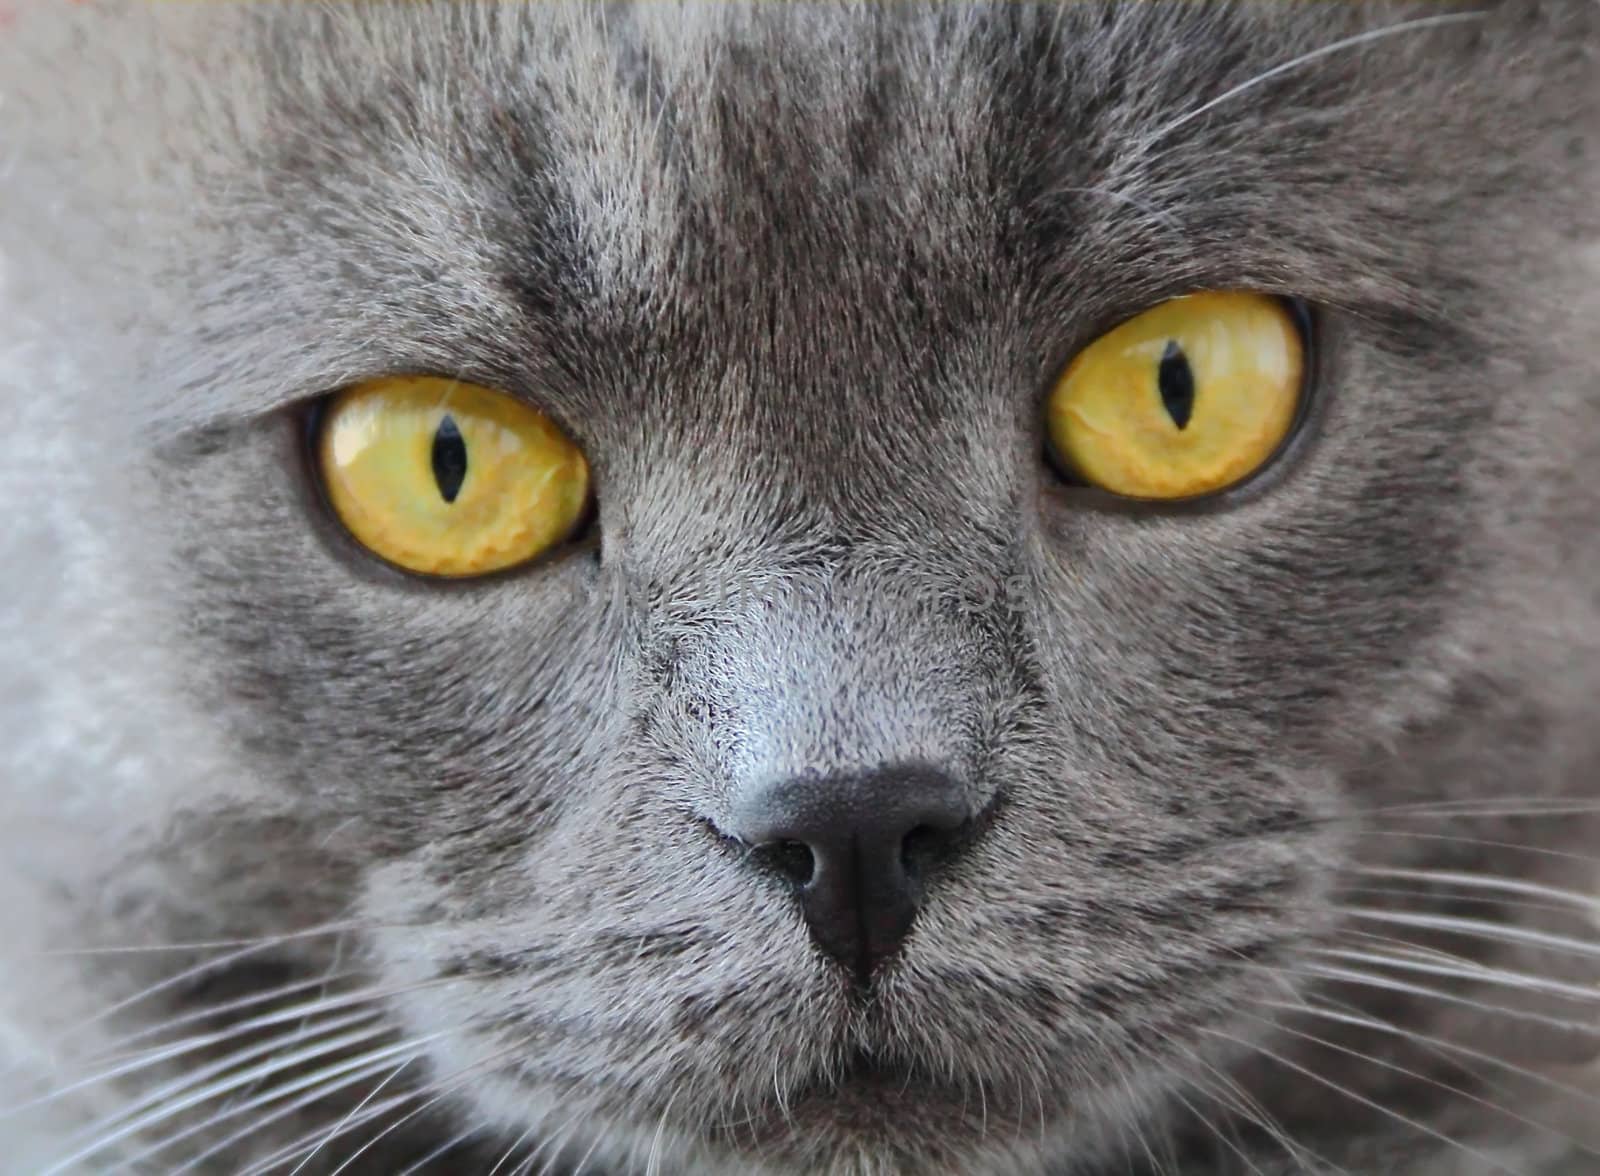 Image of cat's portrait with yellow eyes 